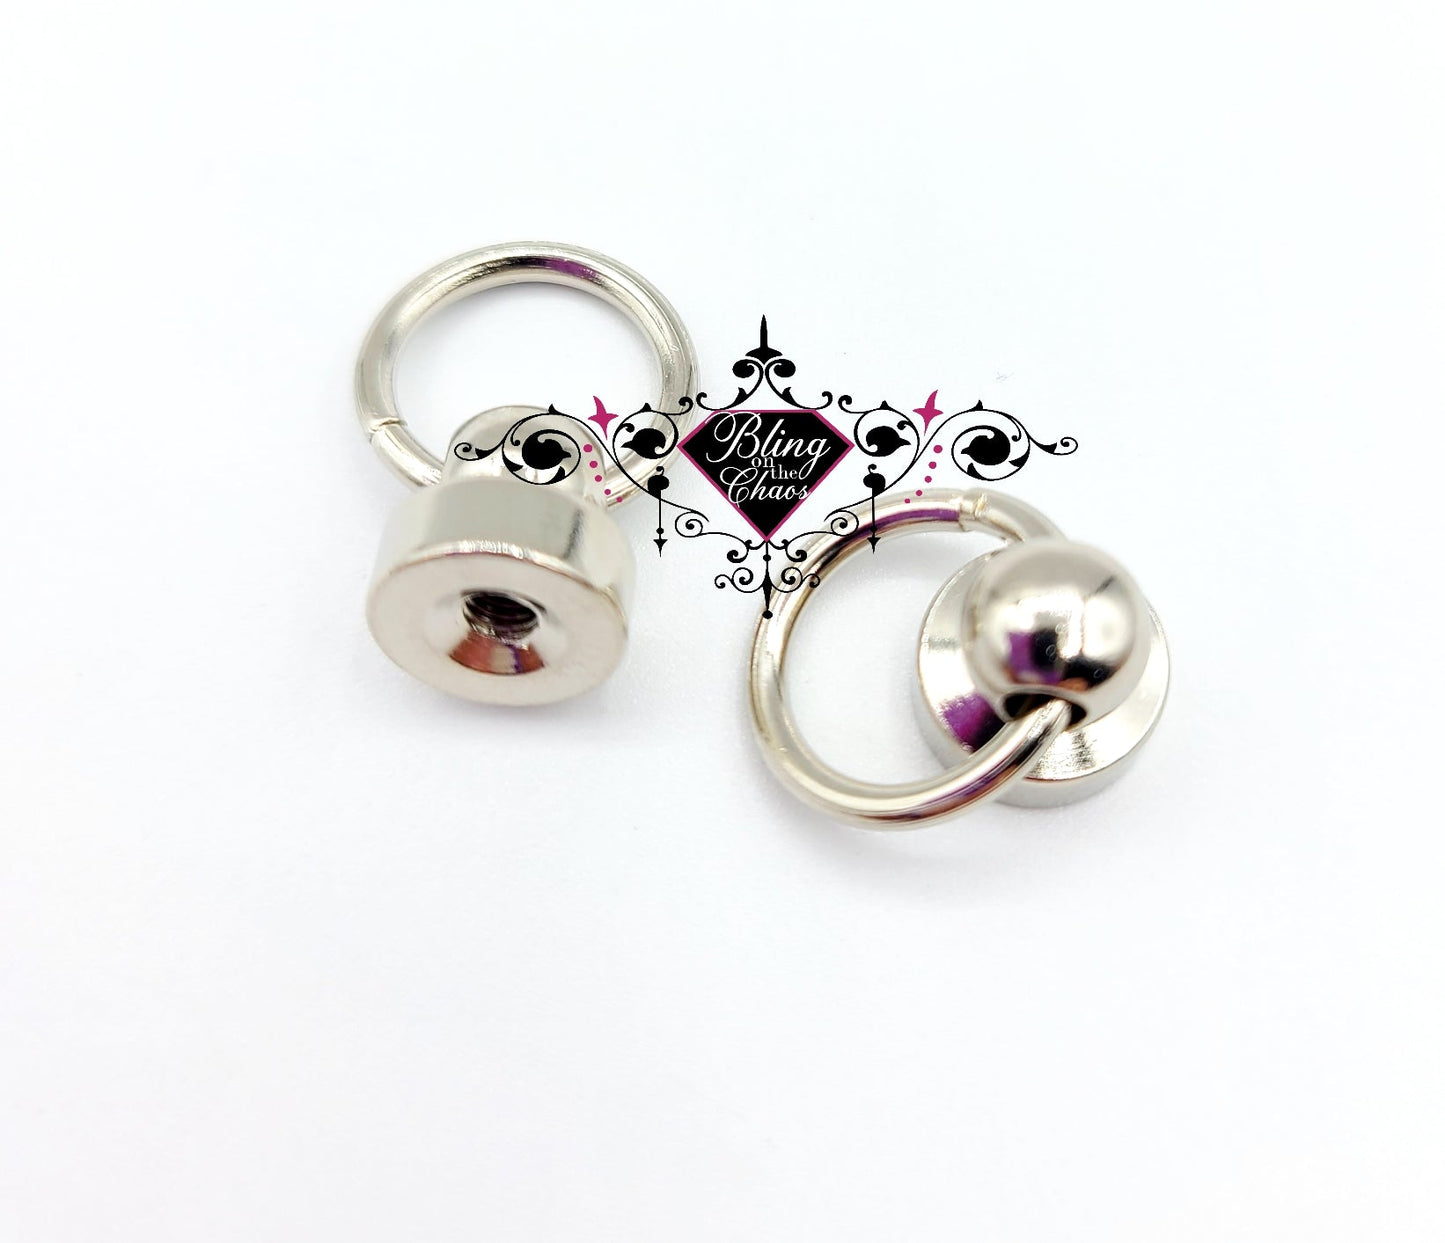 Dingle Dangle Dongle Ring-Bling on the Chaos